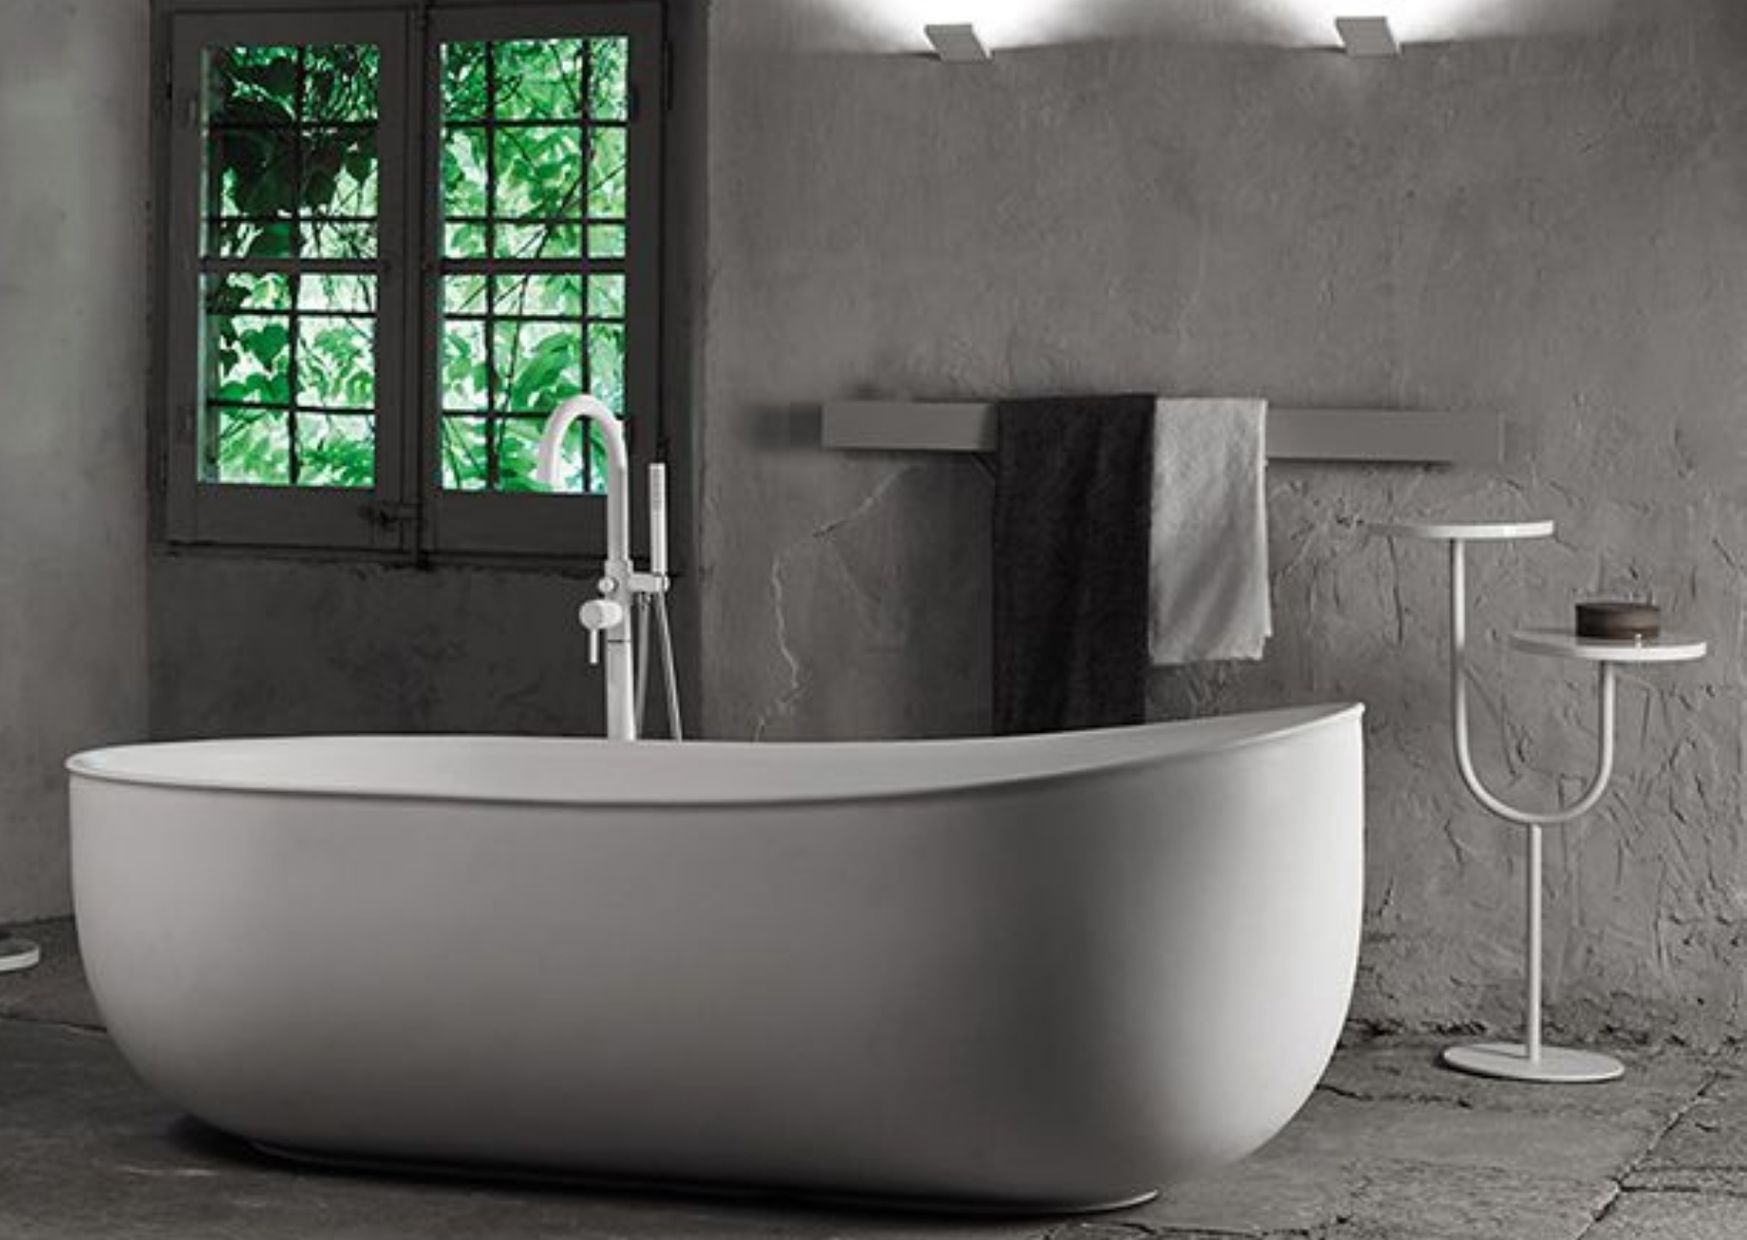 Bathtubs: The Selection That Will Make You Fall In Love